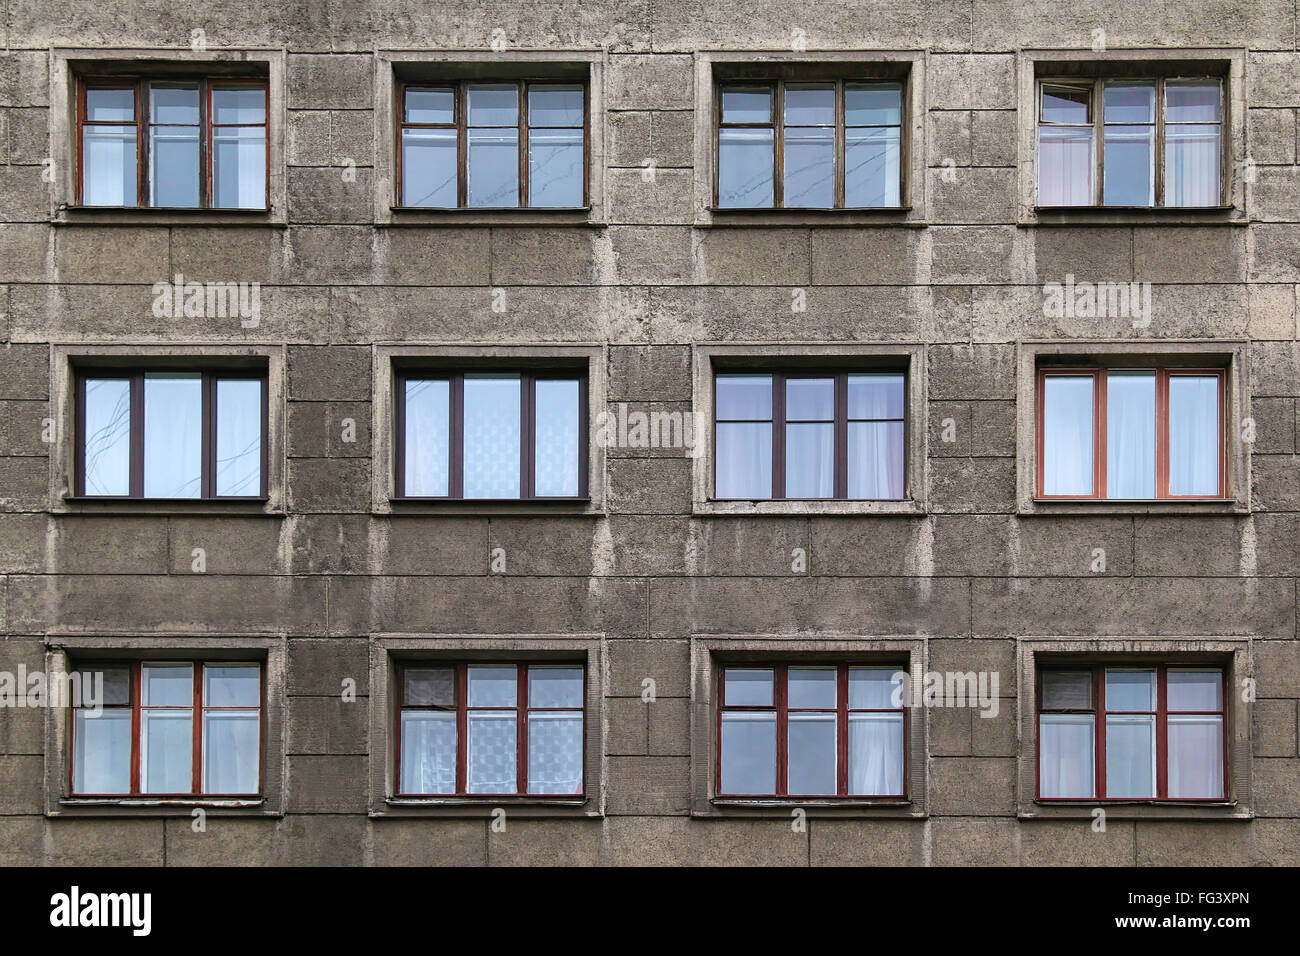 Many windows in row on facade of urban apartment building front view, St. Petersburg, Russia Stock Photo